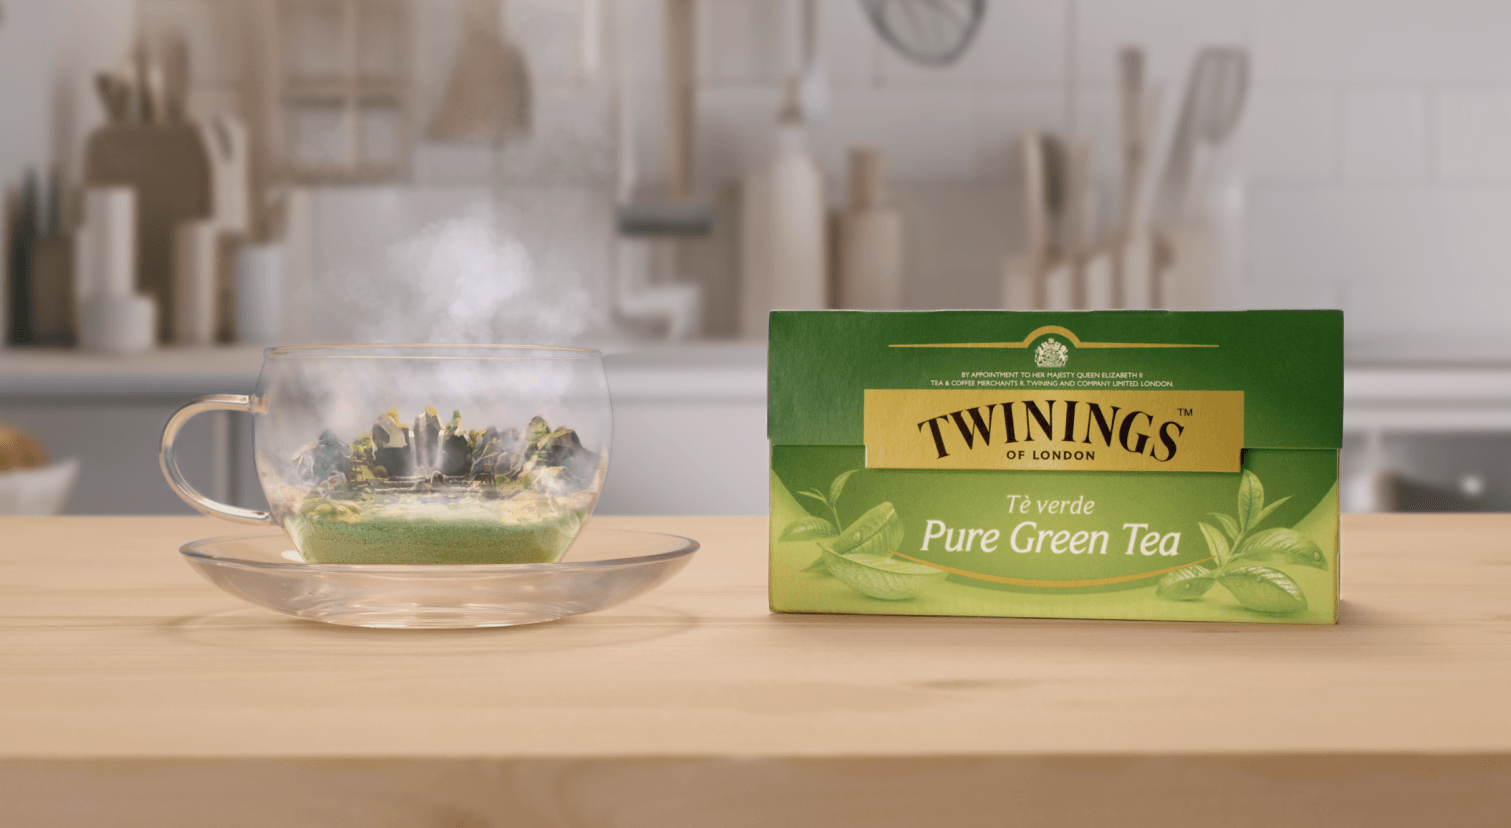 The packaging of Twinings' Pure Green Tea, next to a cup of infused tea.